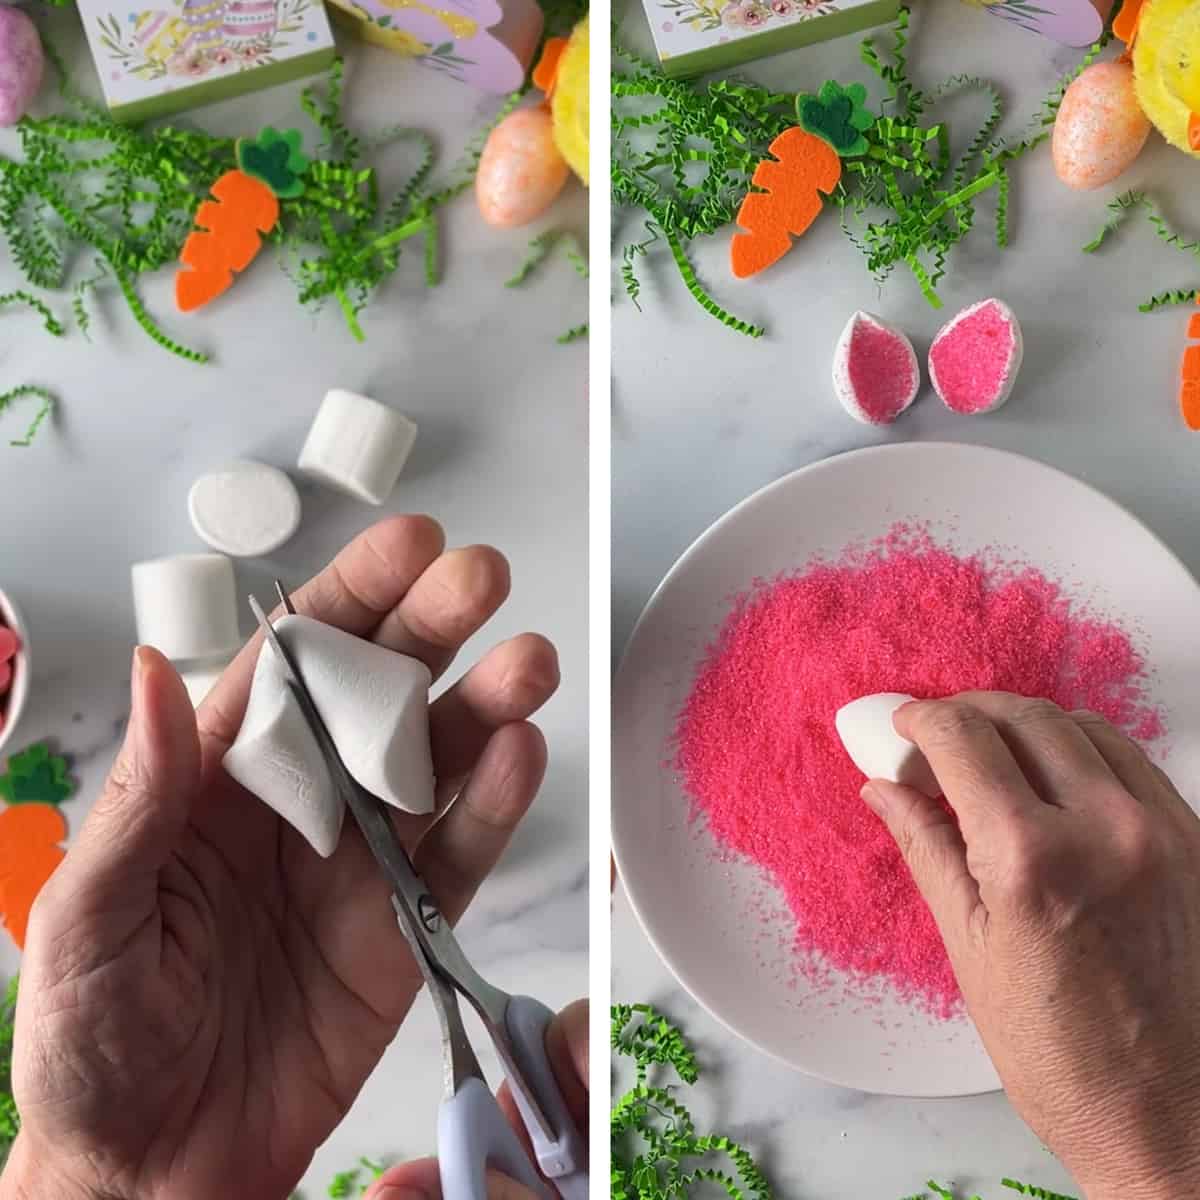 Cutting a marshmallow in half with scissors and dipping in pink sugar.